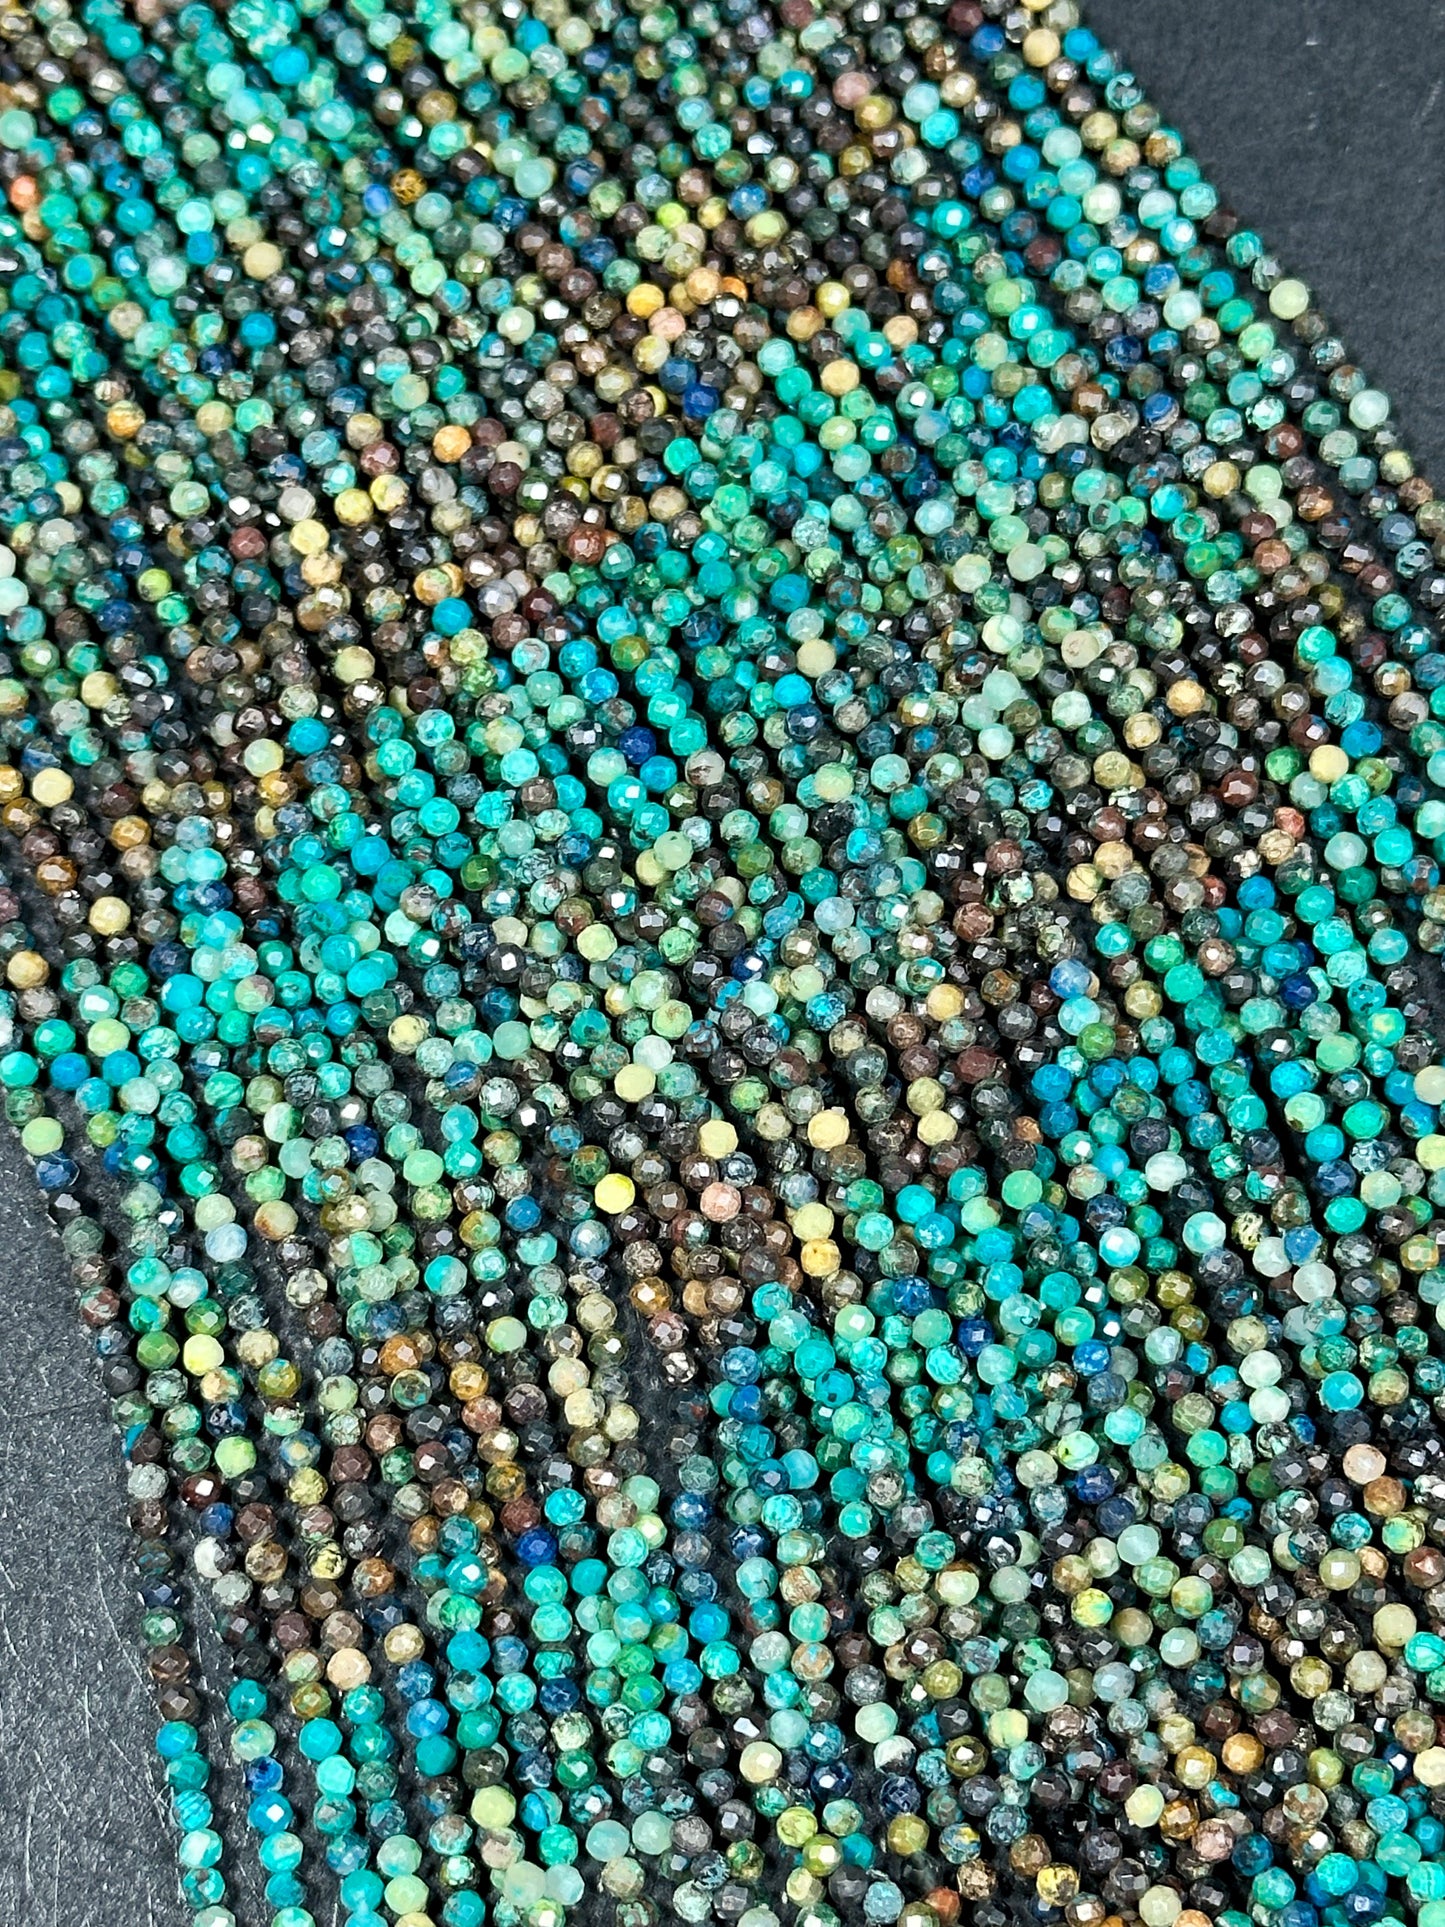 NATURAL Turquoise Gemstone Bead Faceted 2mm Round Beads, Gorgeous Blue Brown Color Turquoise Gemstone Beads Full Strand 15.5"